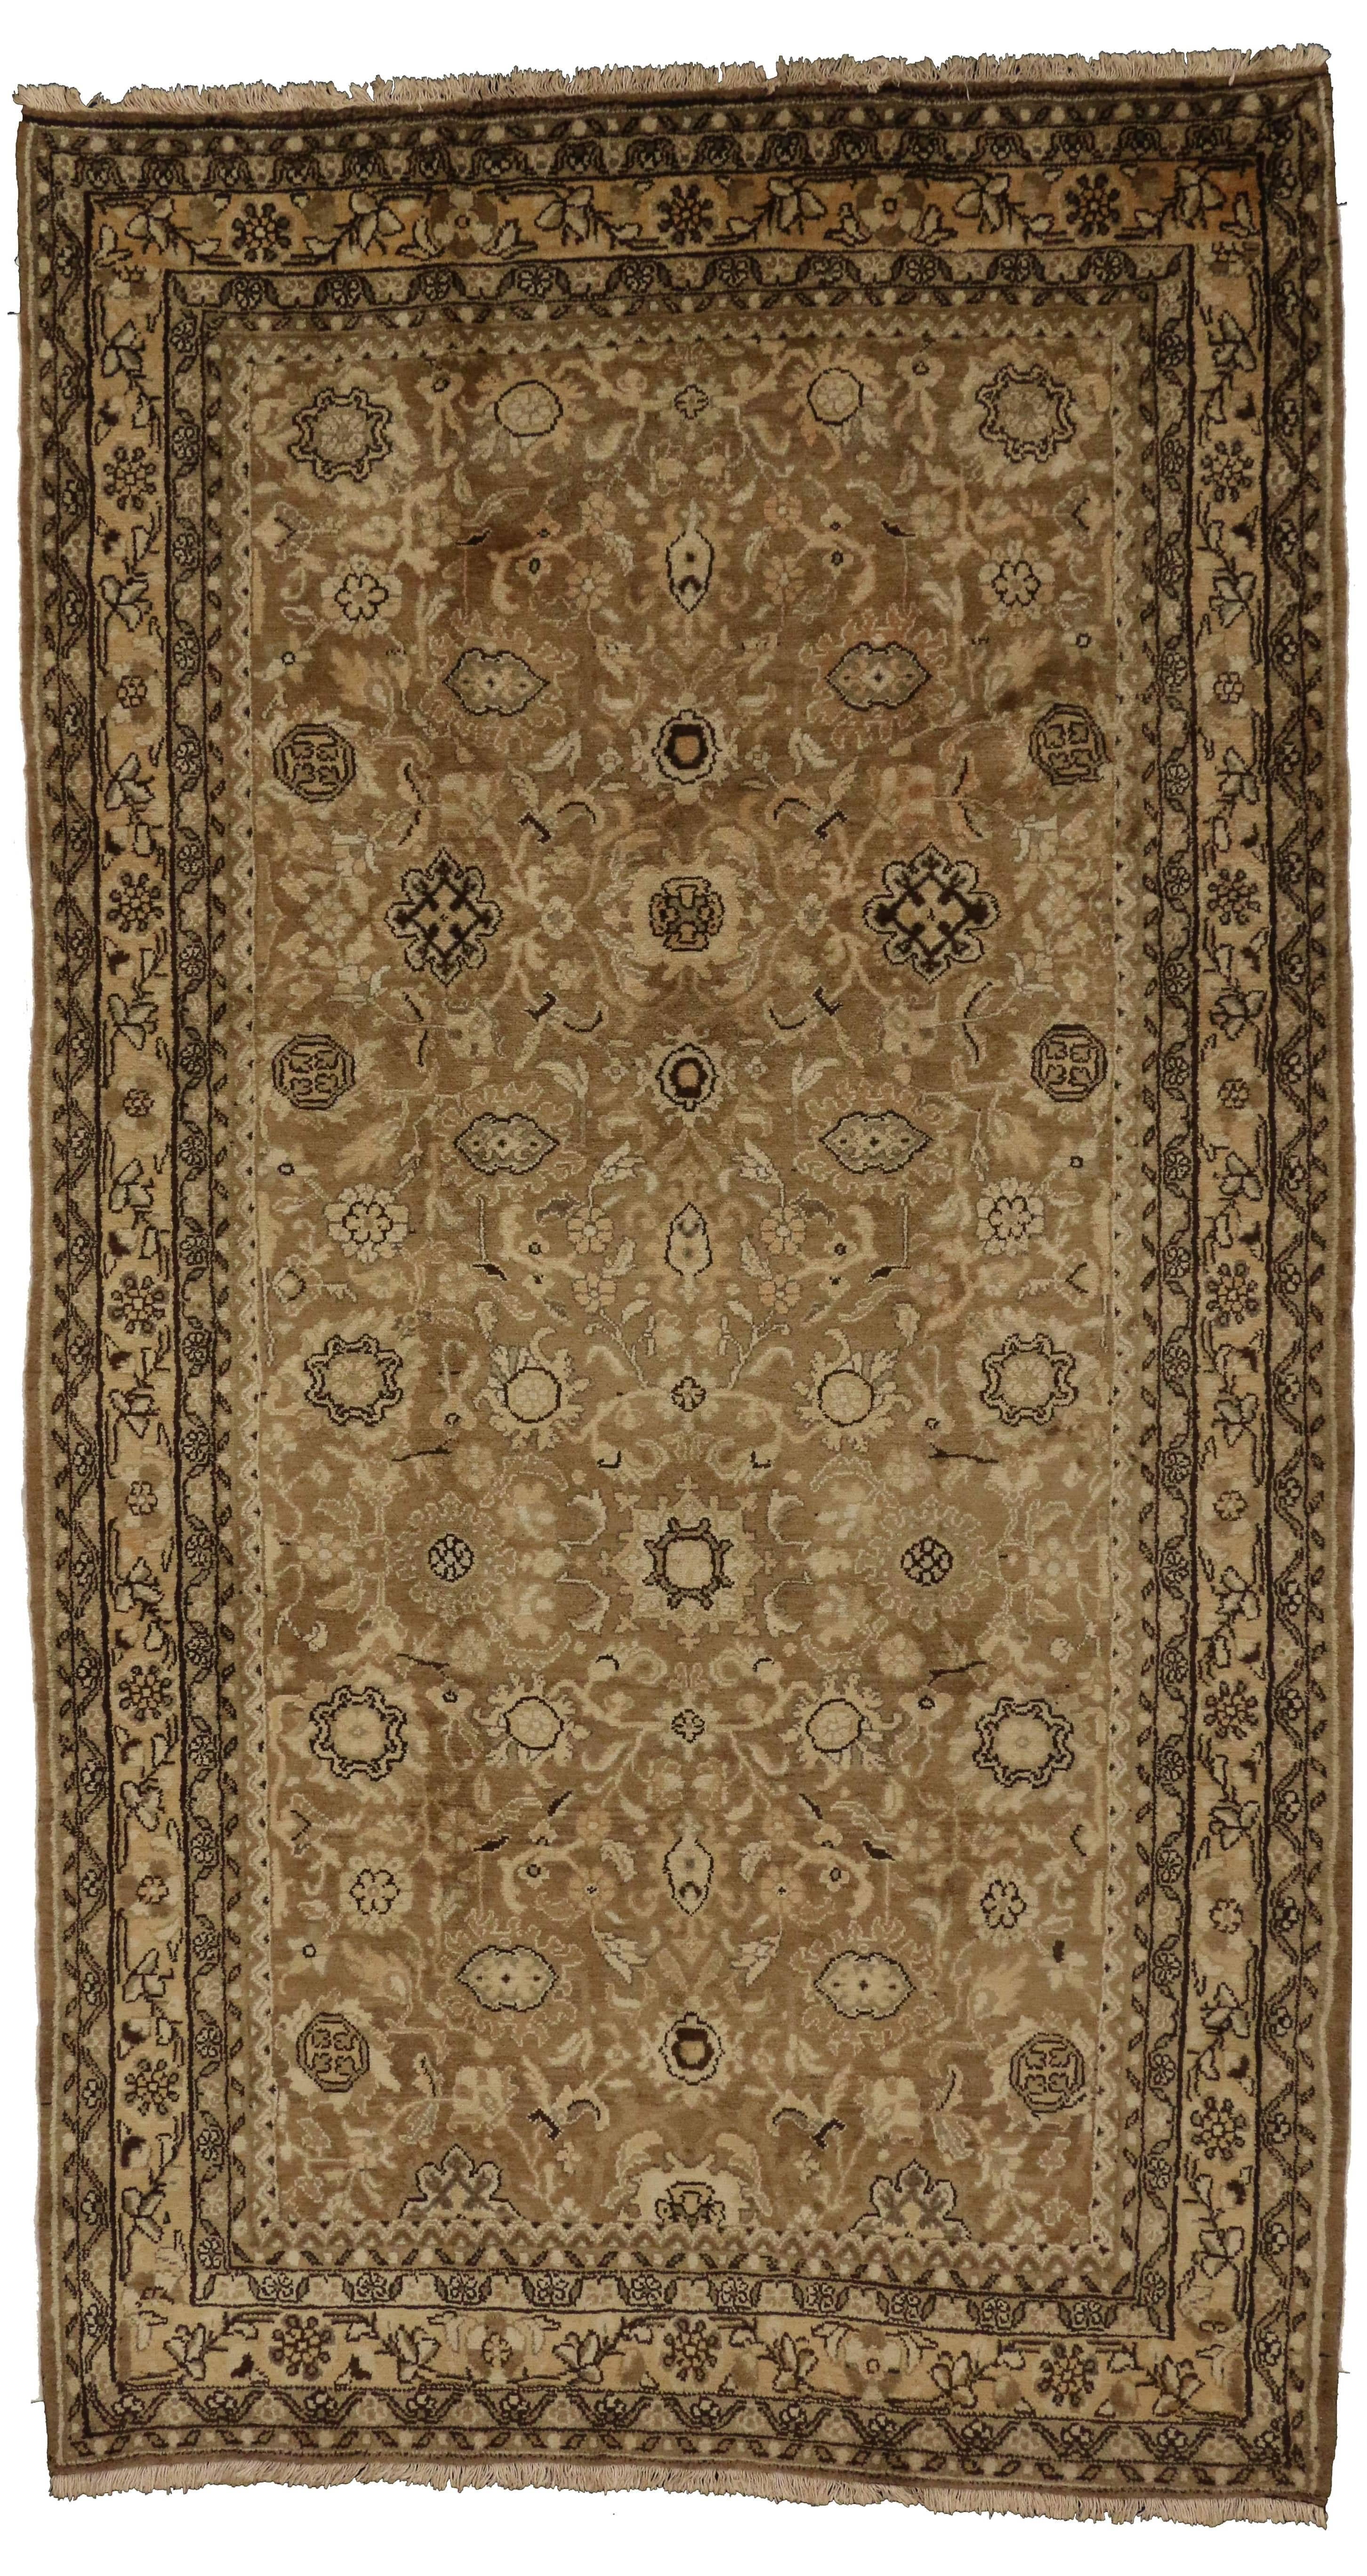 Vintage Persian Hamadan Gallery Rug with Warm, Neutral Colors In Good Condition For Sale In Dallas, TX